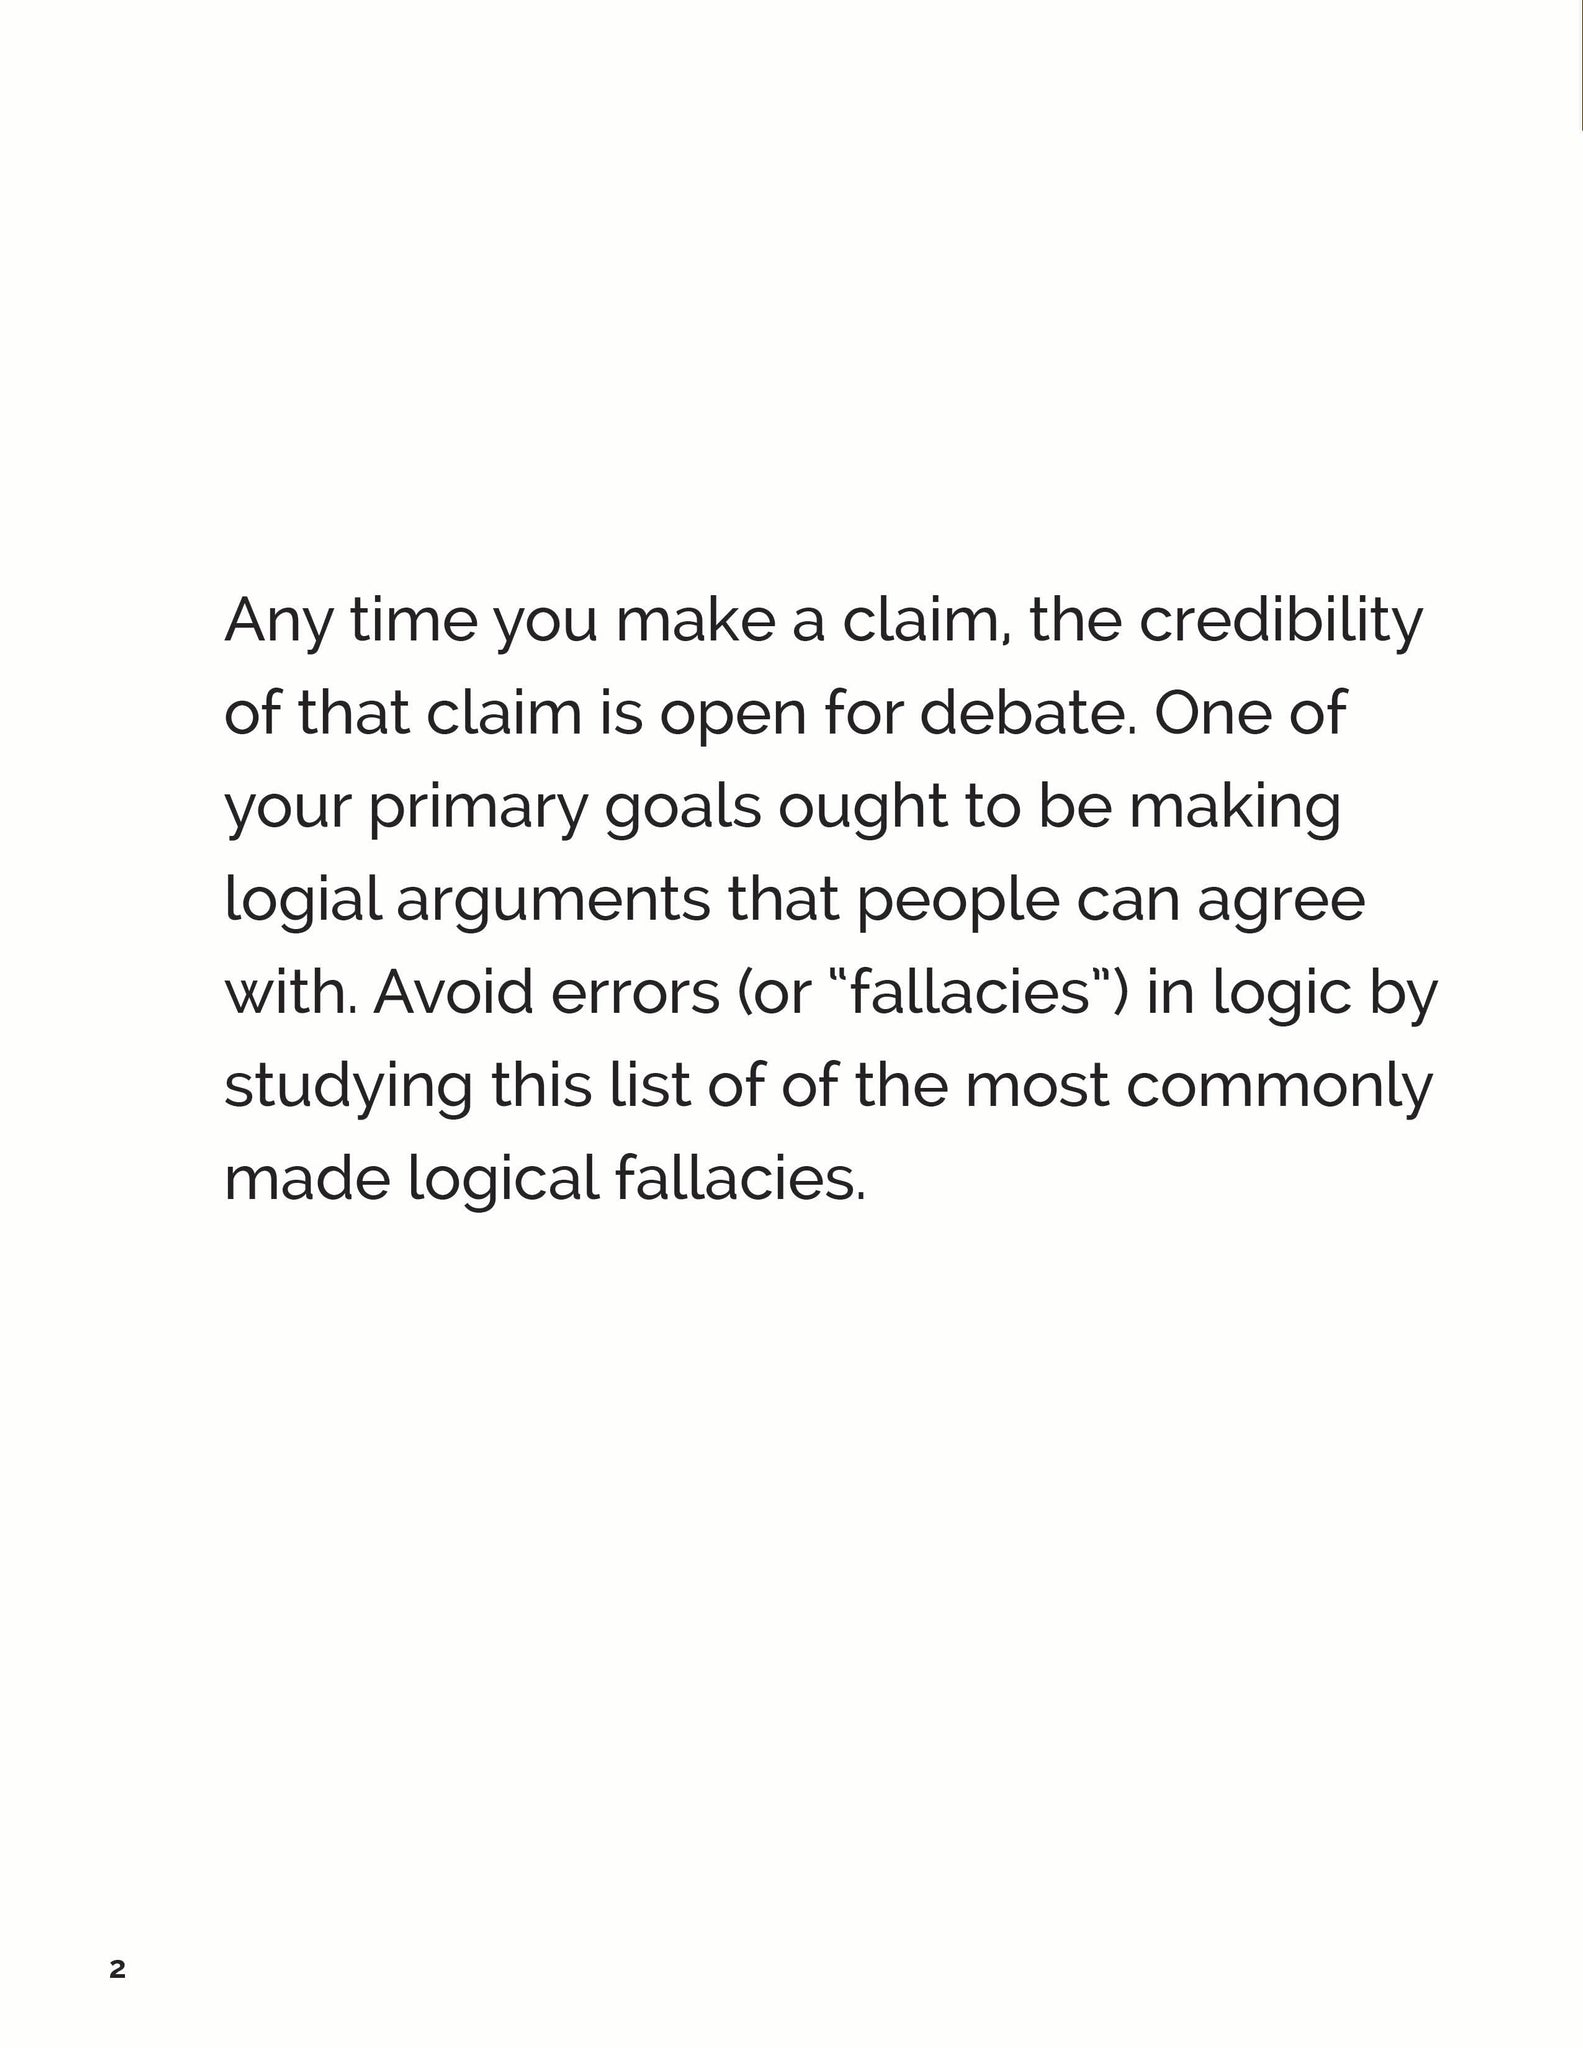 Logical Fallacies 14-page Quick Guide **DIGITAL DOWNLOAD**